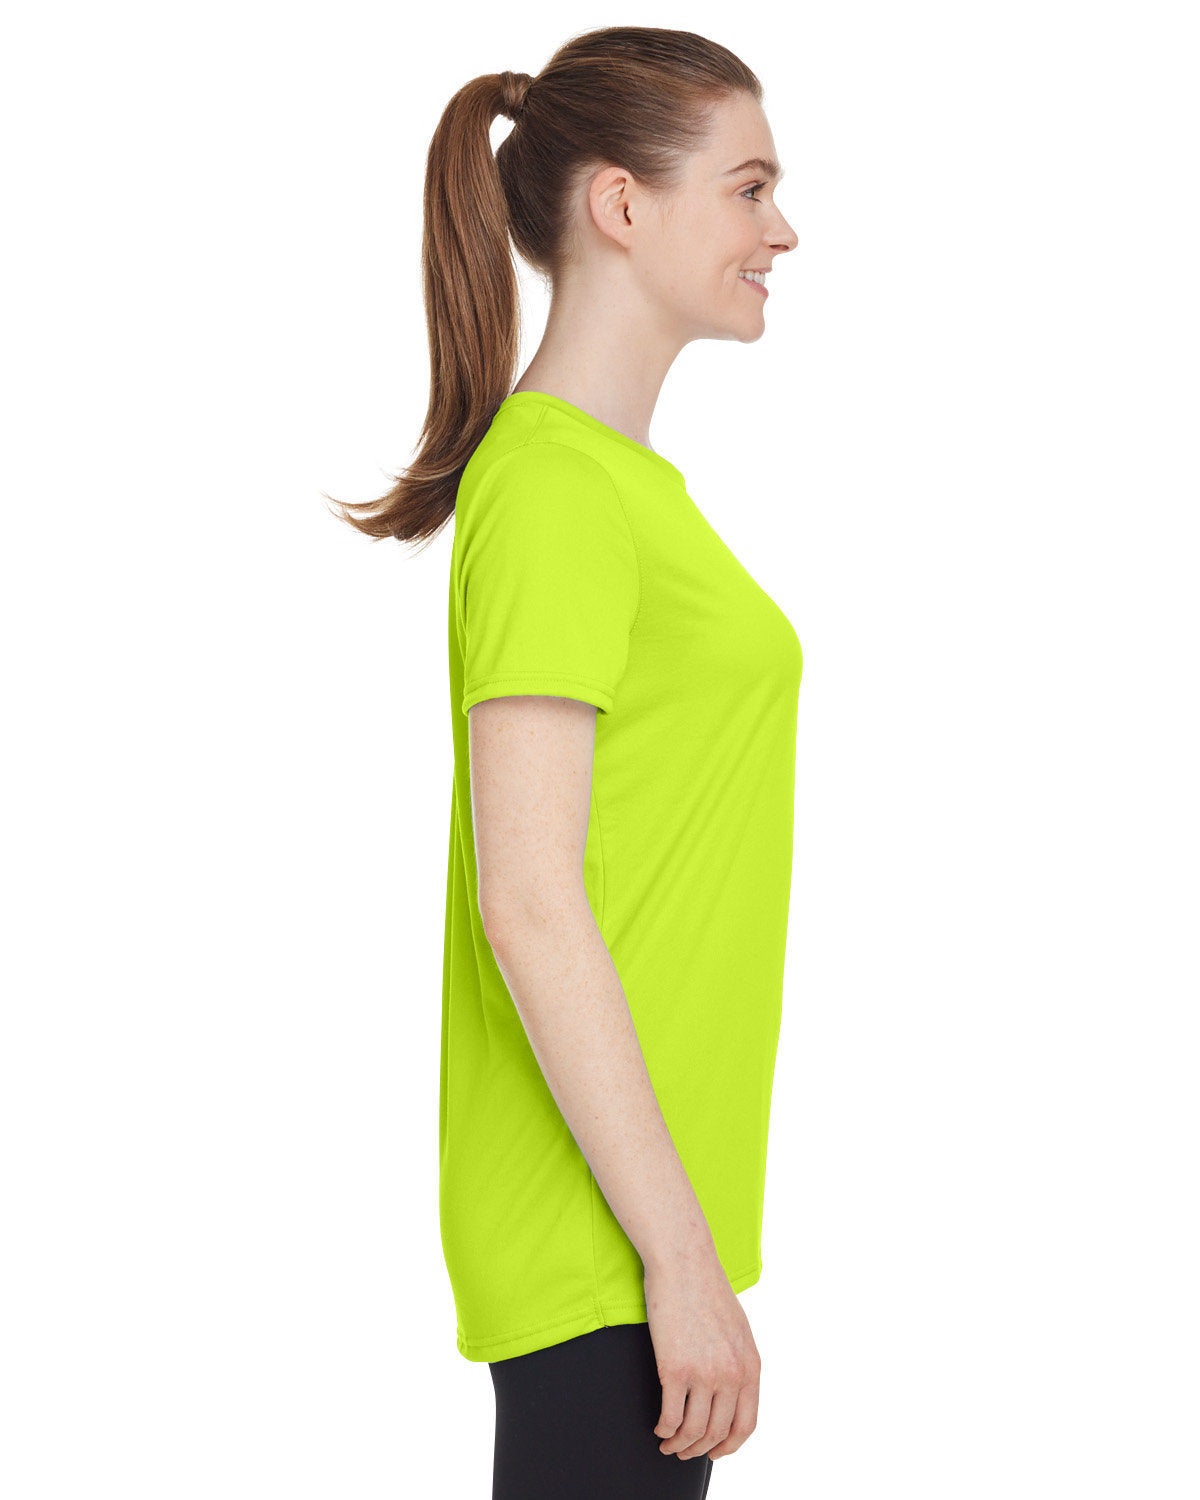 Under Armour Ladies Tech Customized T-Shirts, High Vis Yellow